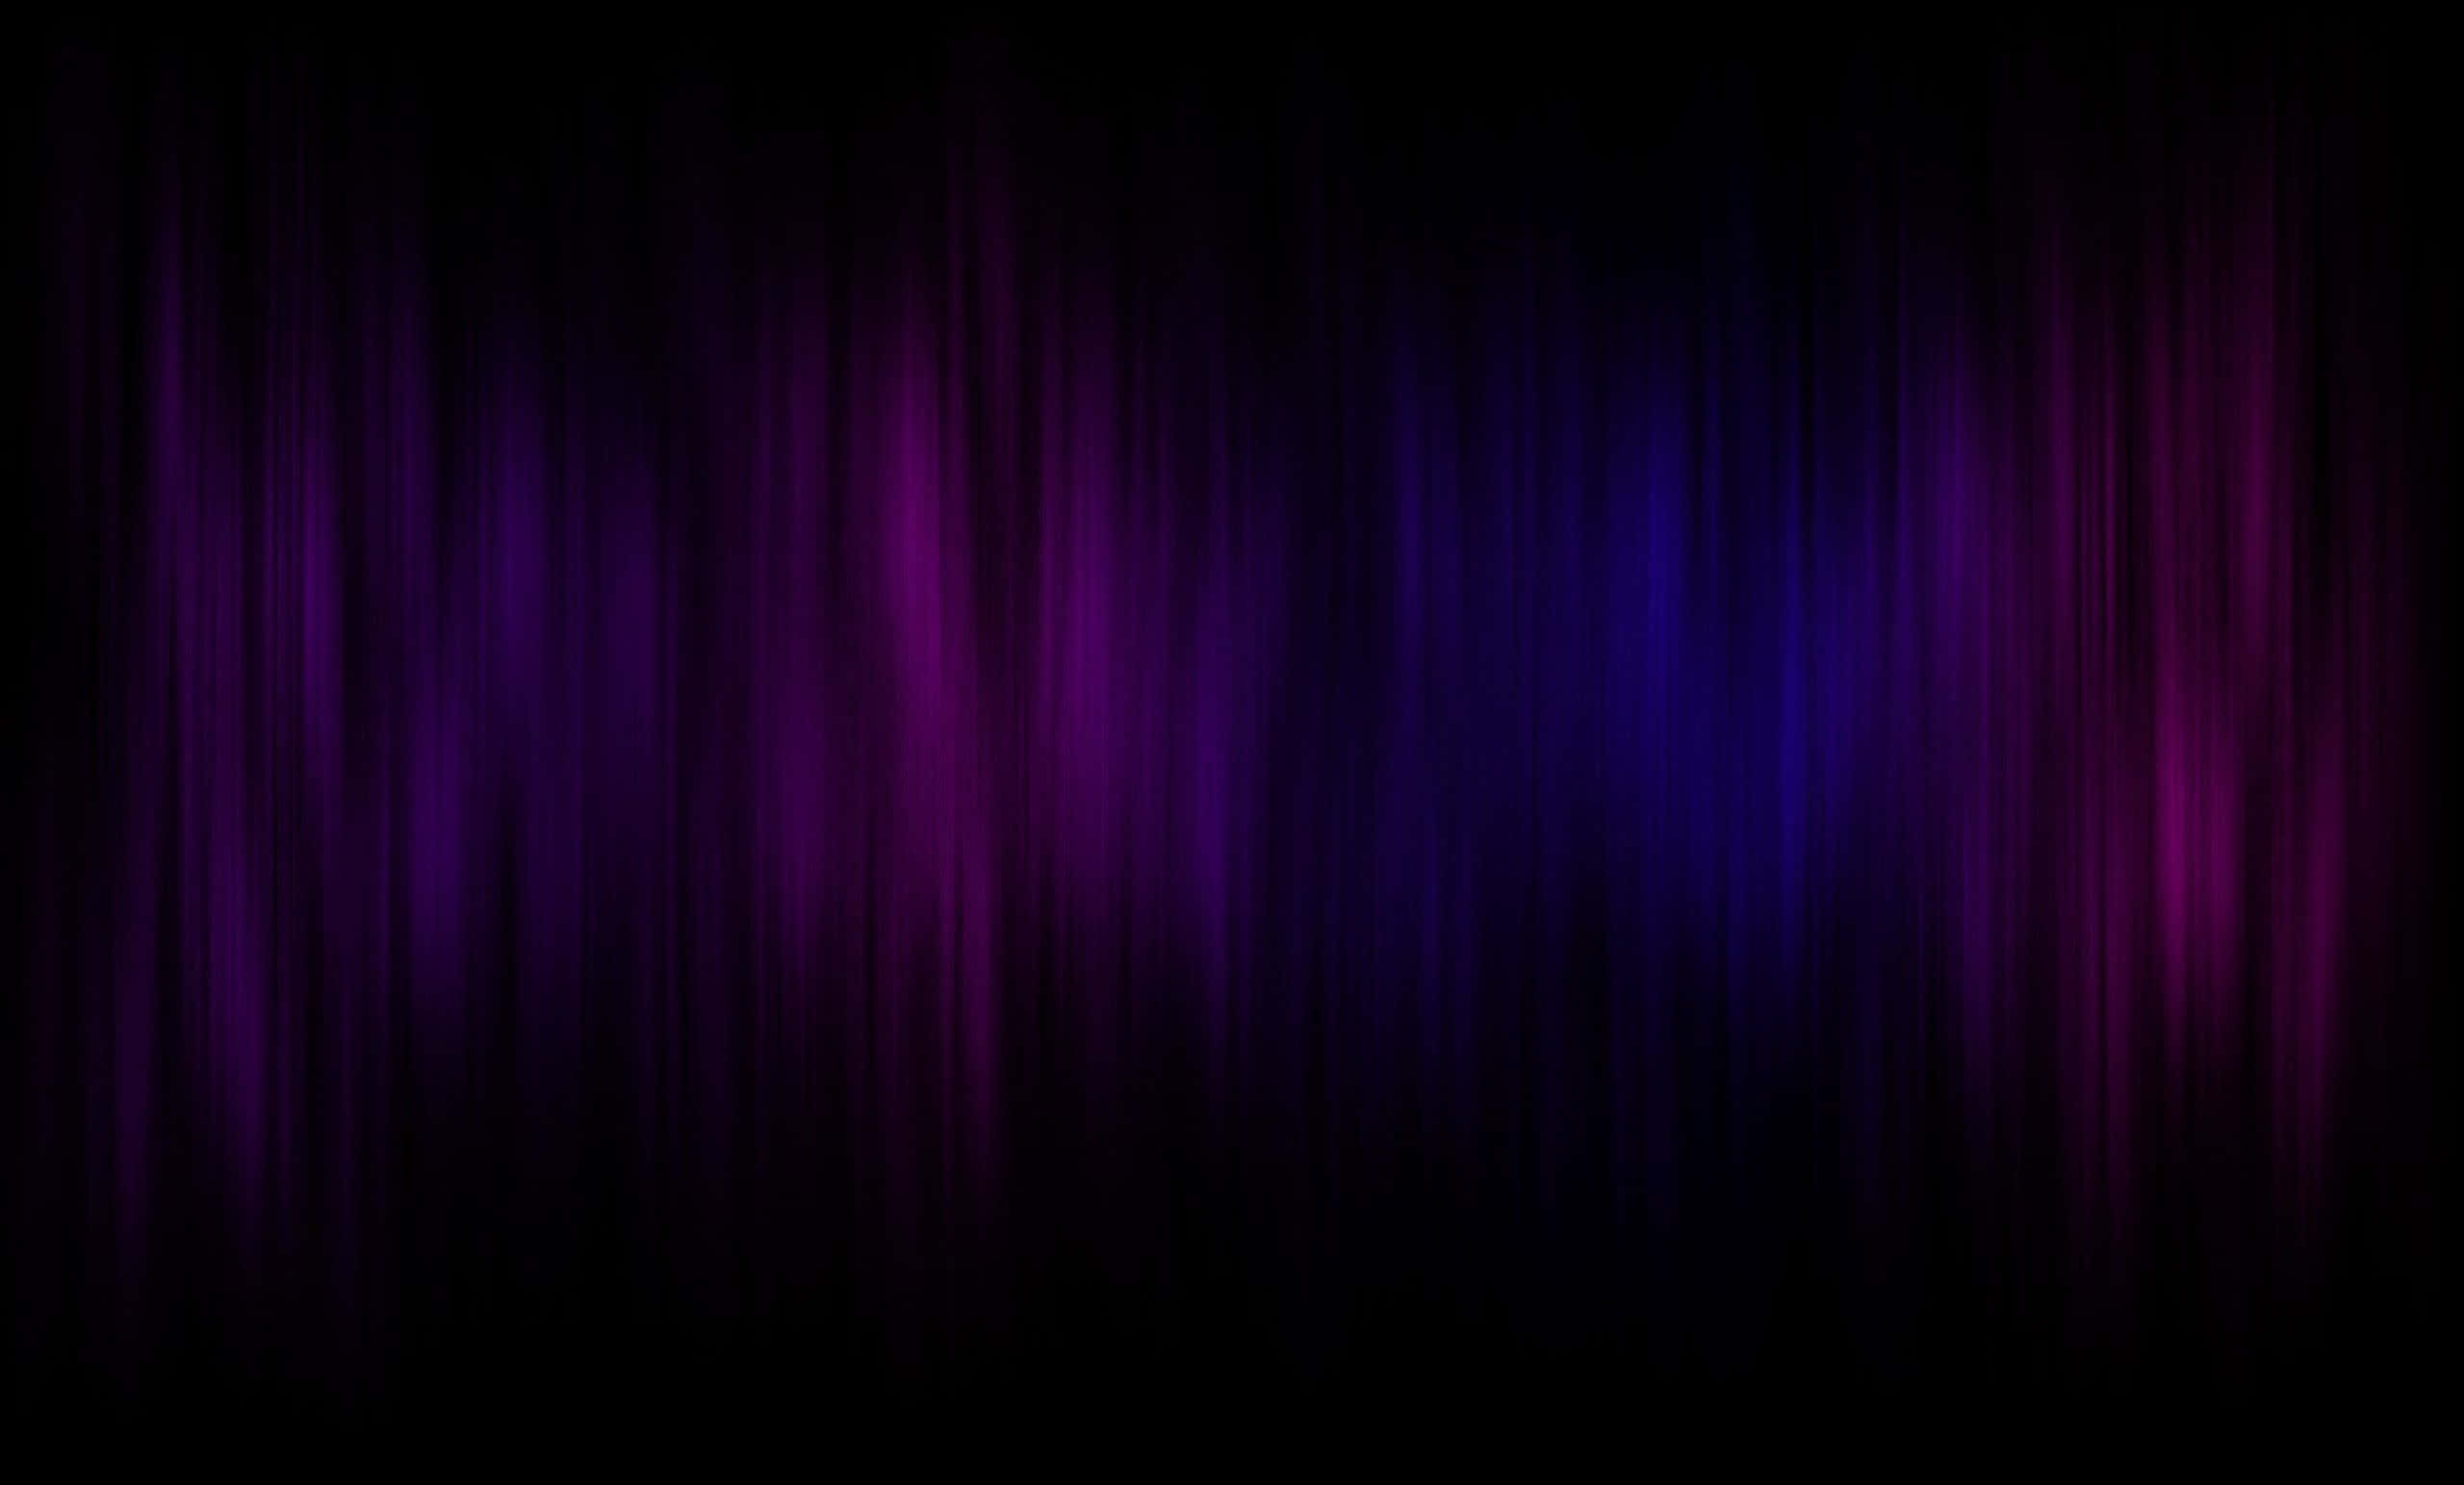 Purple And Black Curtain Vector Background